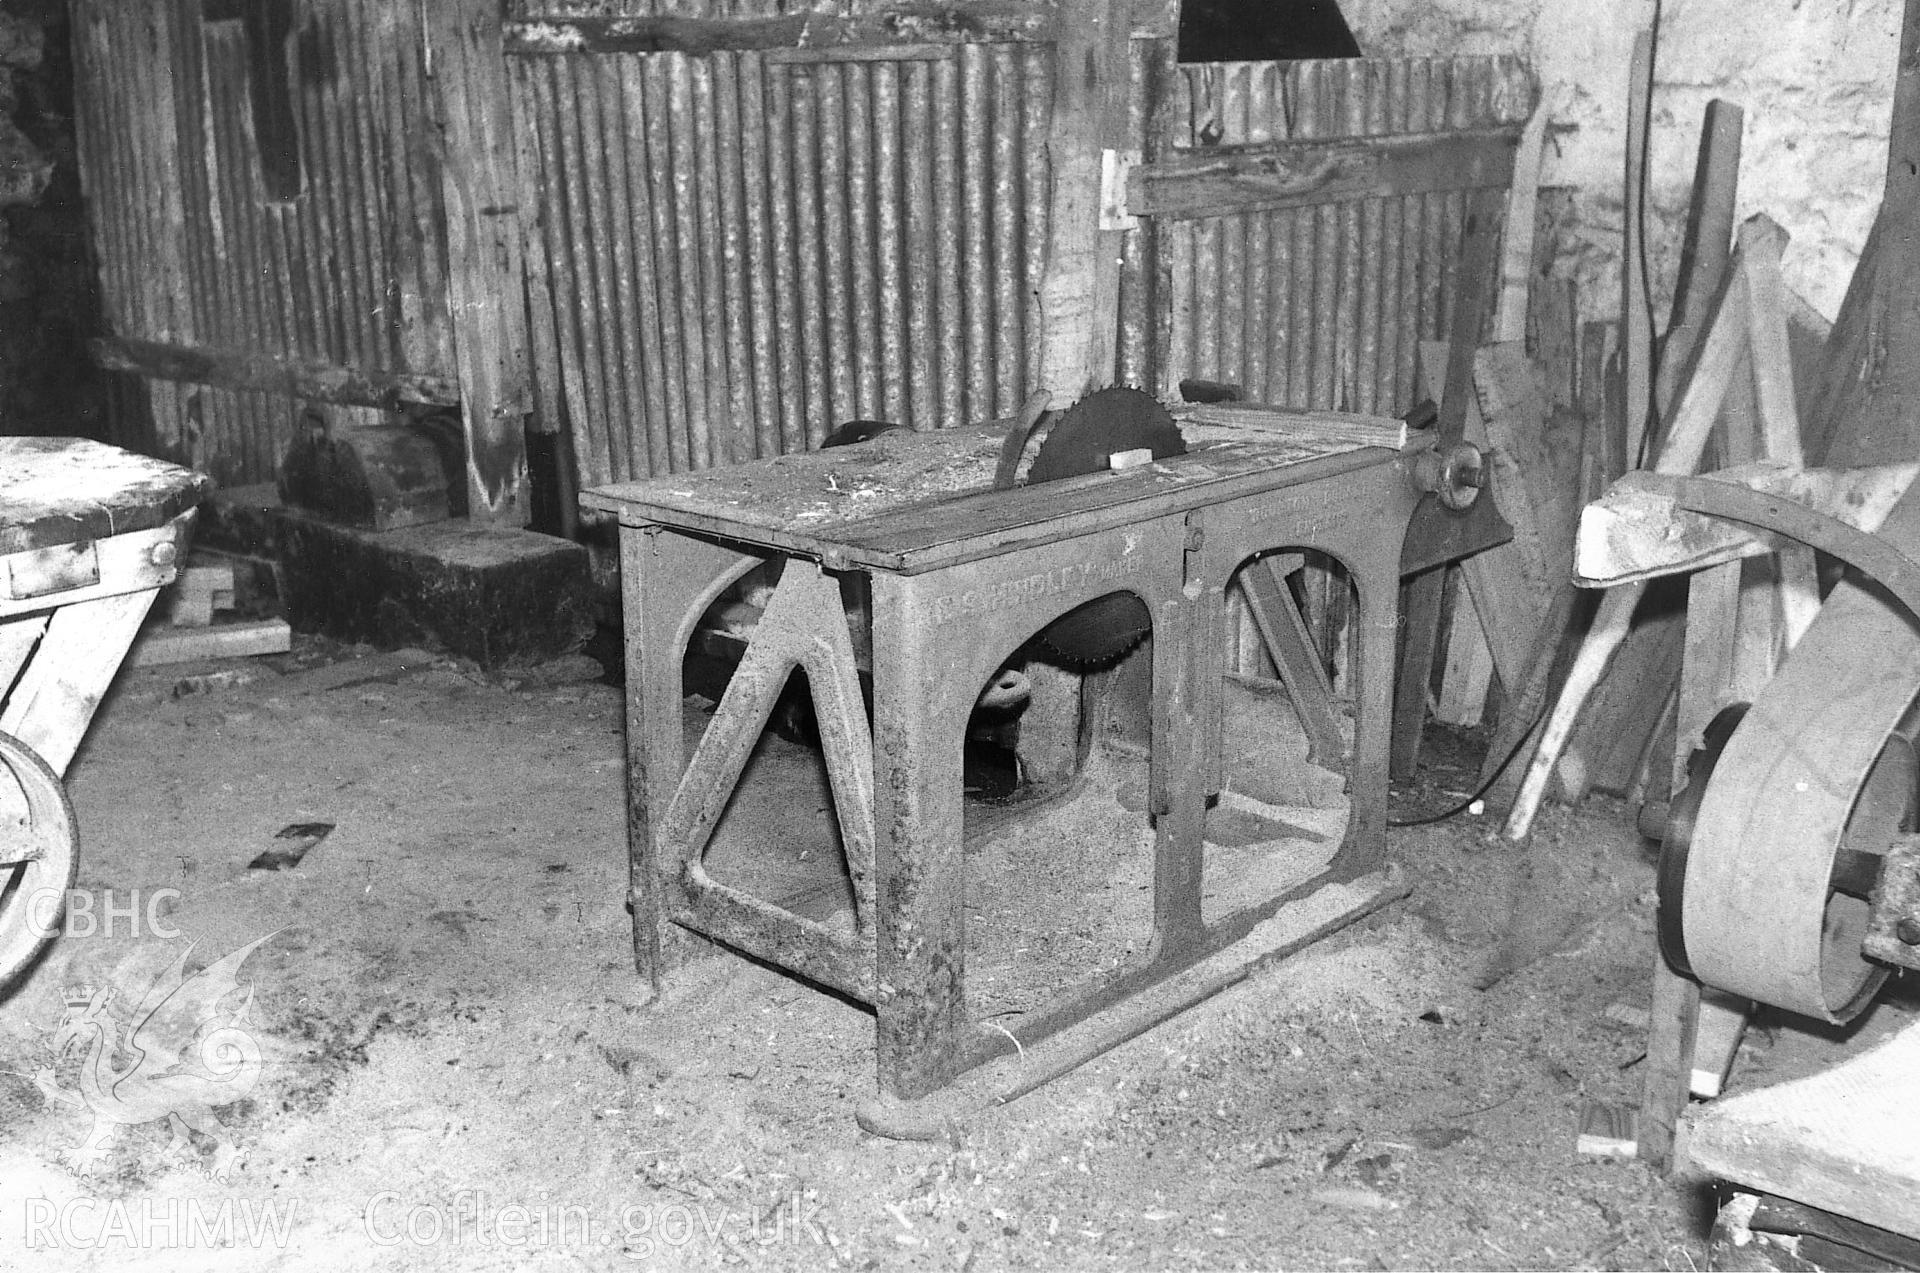 View of a sawbench at Park Mill, Gower.